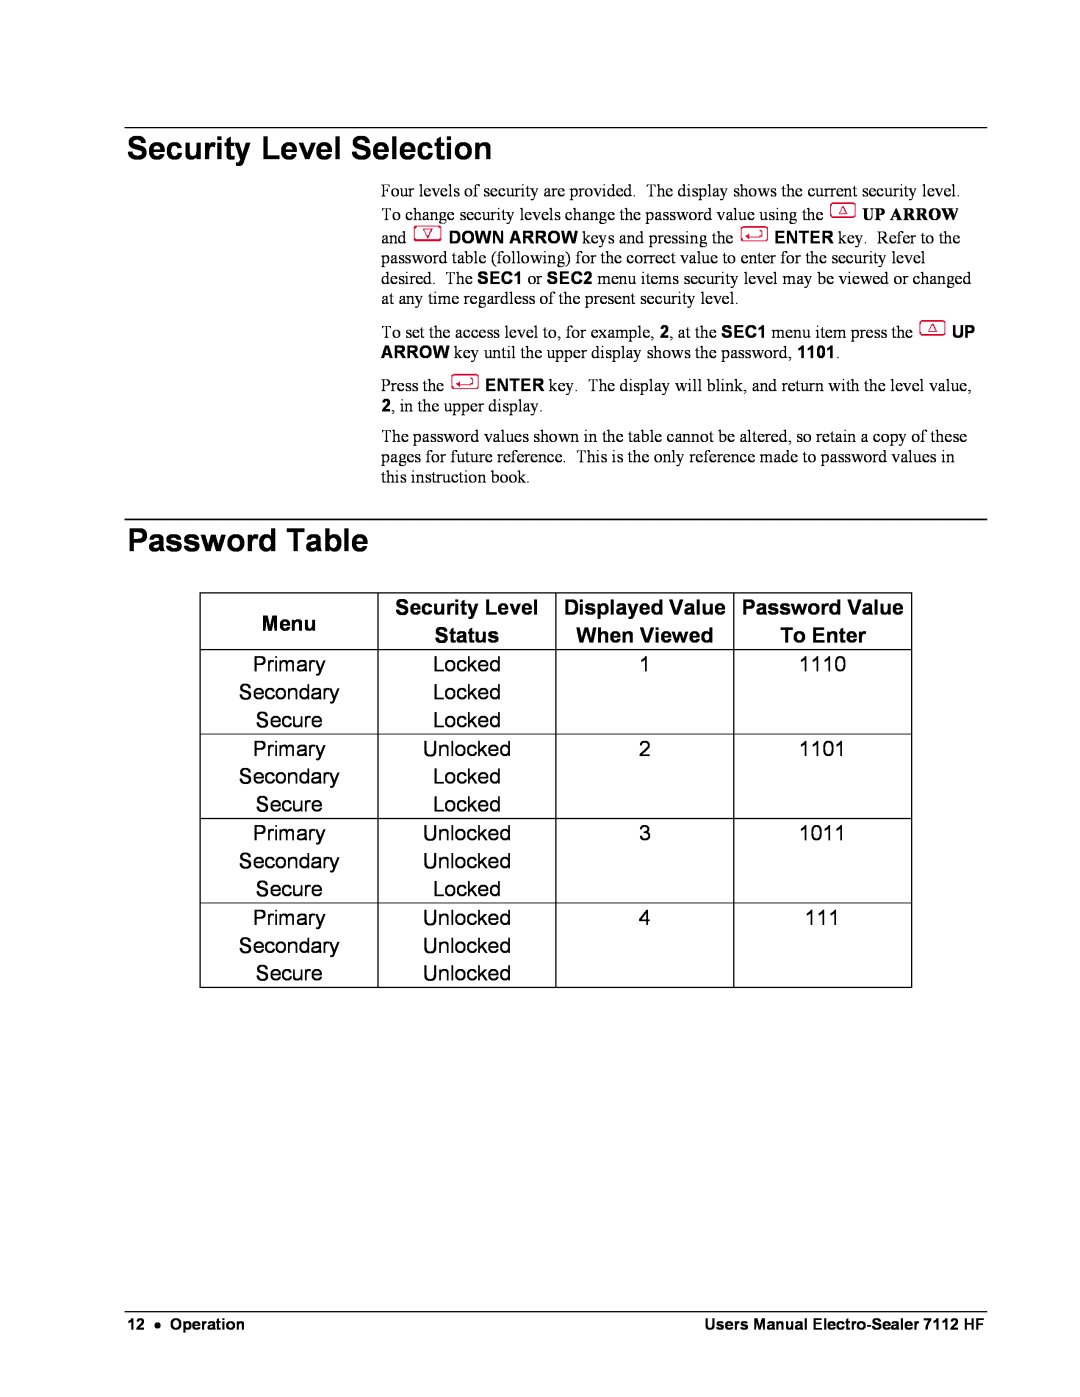 Avery 7112 HF user manual Security Level Selection, Password Table 